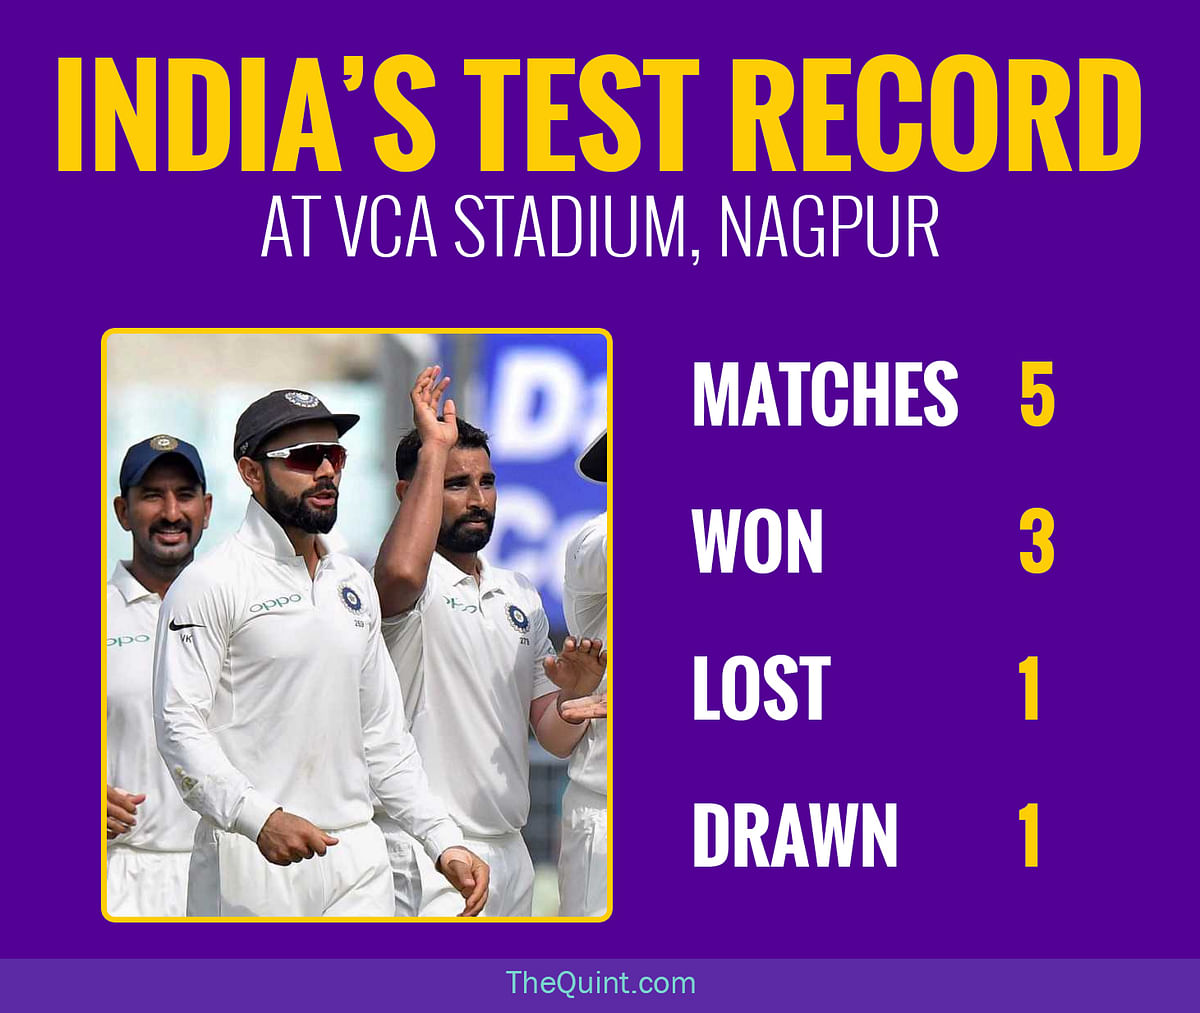 The two spinners together bowled 10 of the total 110 overs that India bowled in the Kolkata Test.